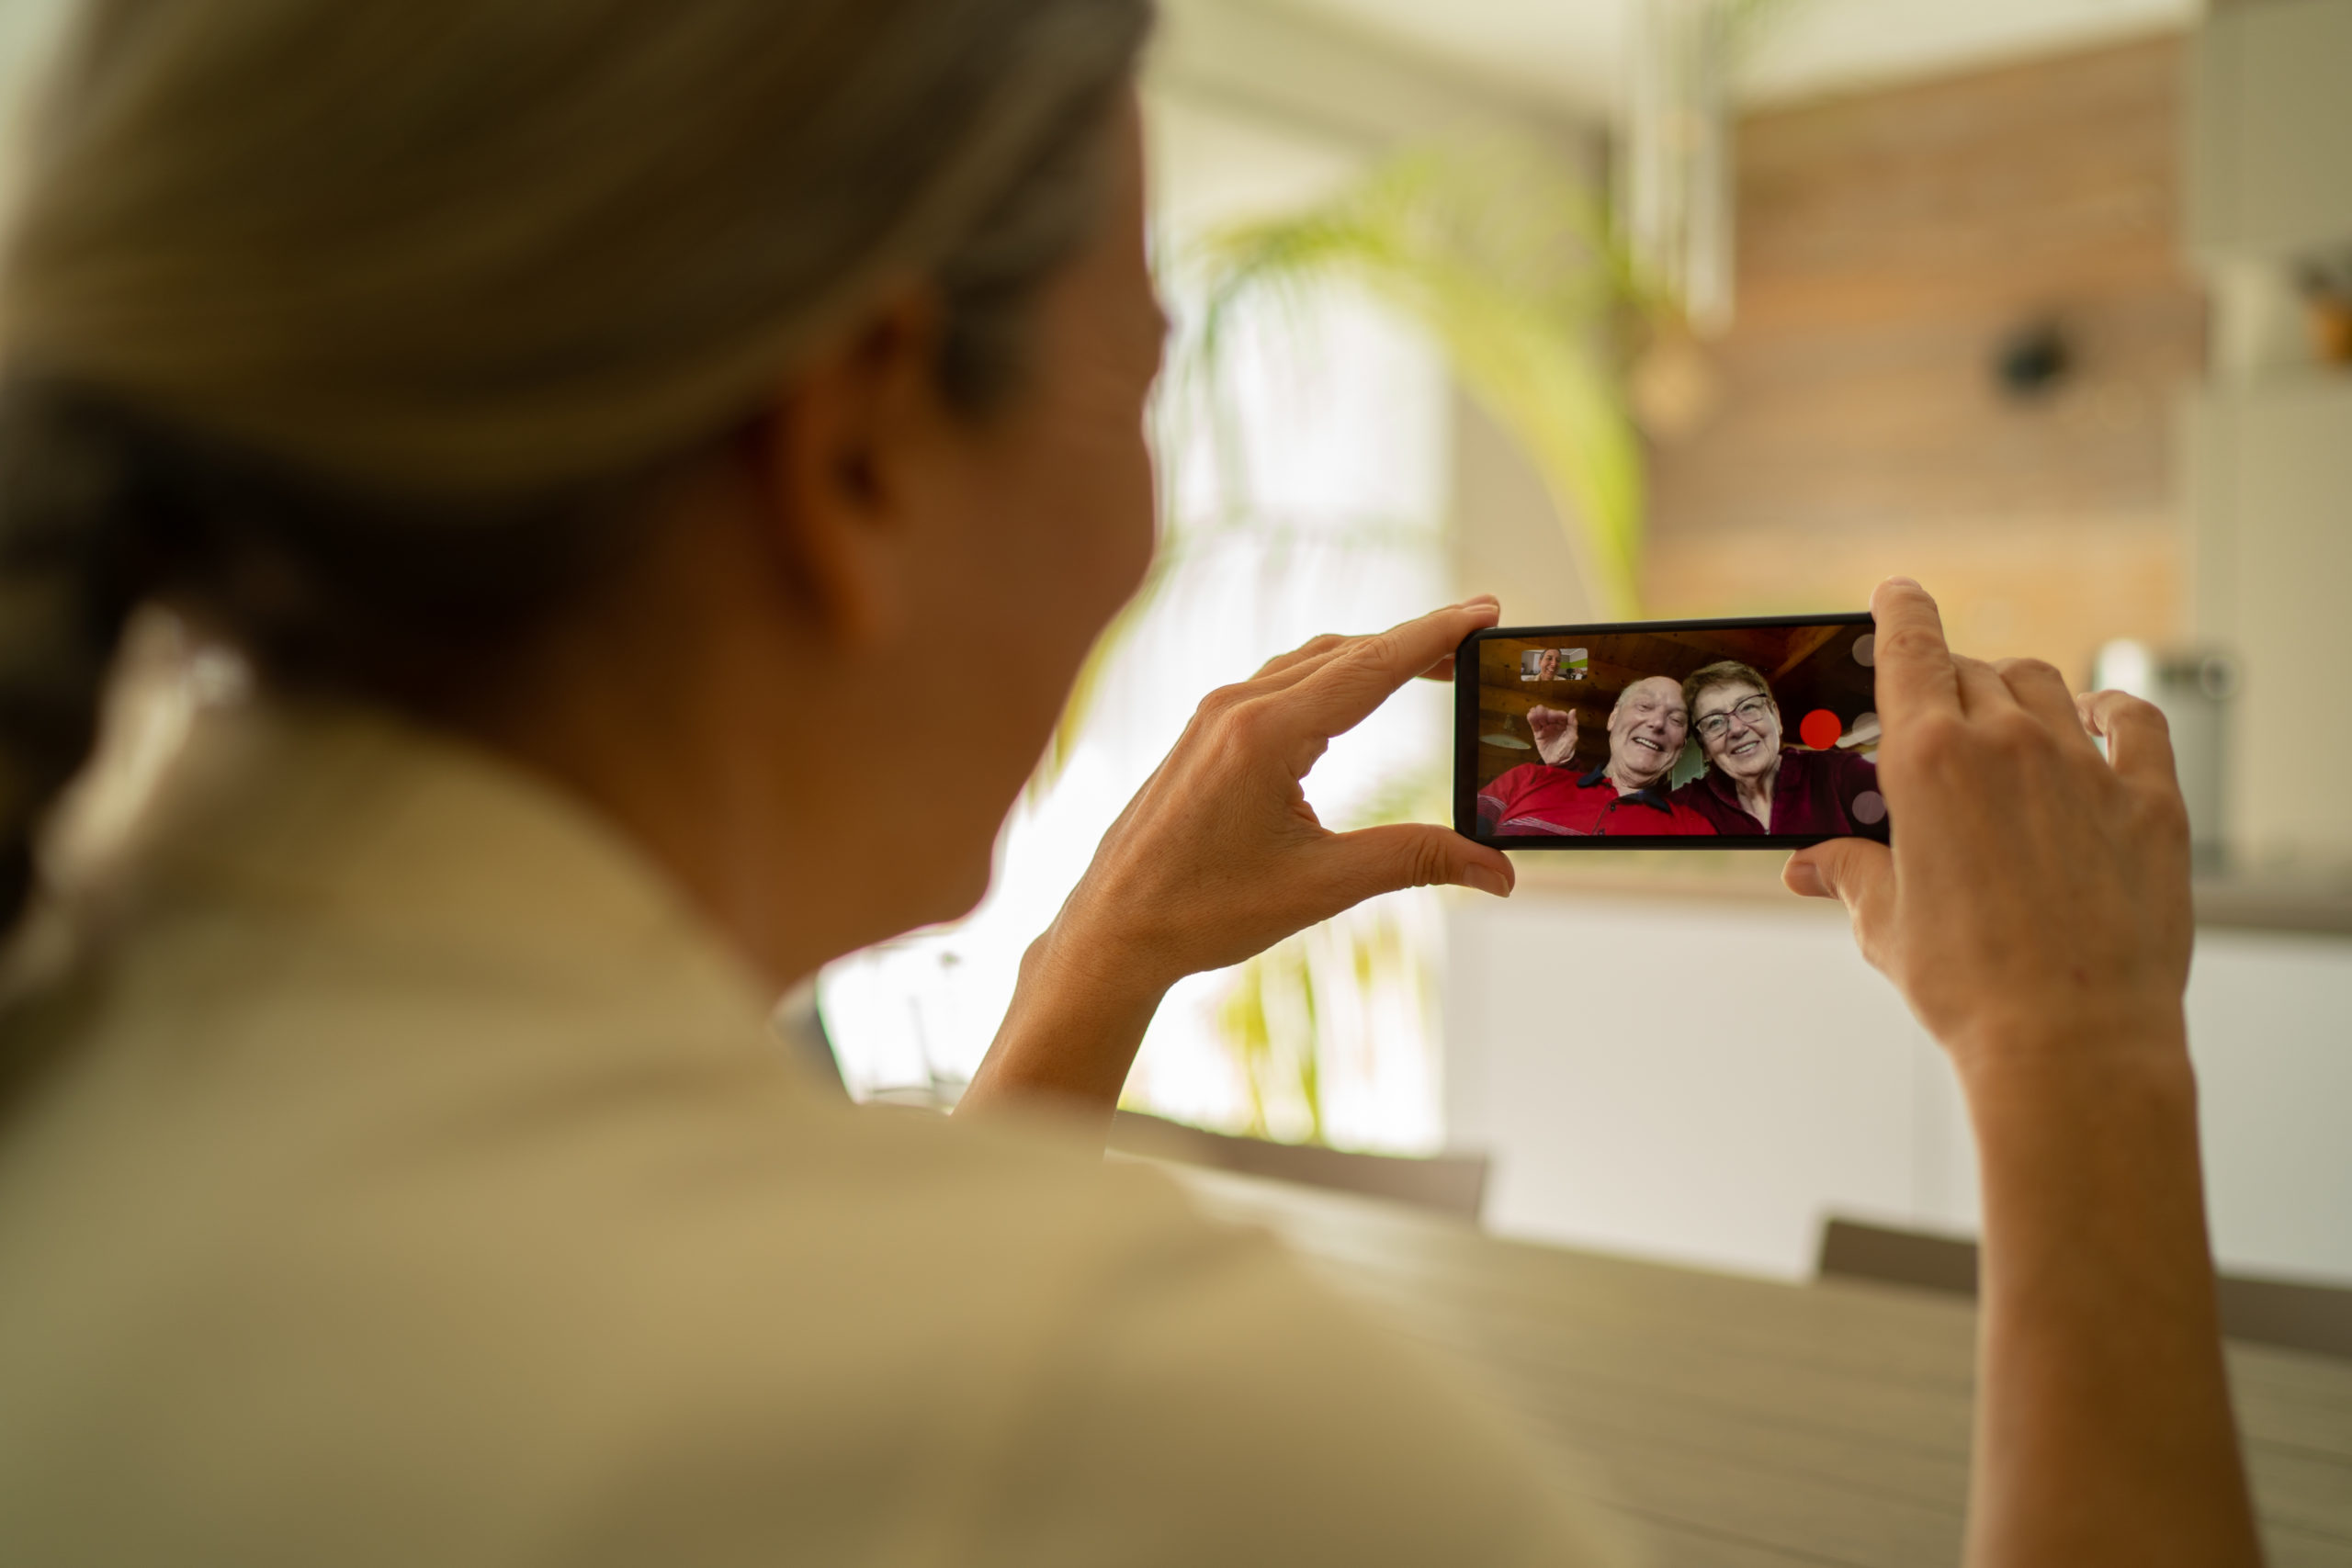 woman adult daughter connected with her senior parents through mobile phone video call during coronavirus crisis